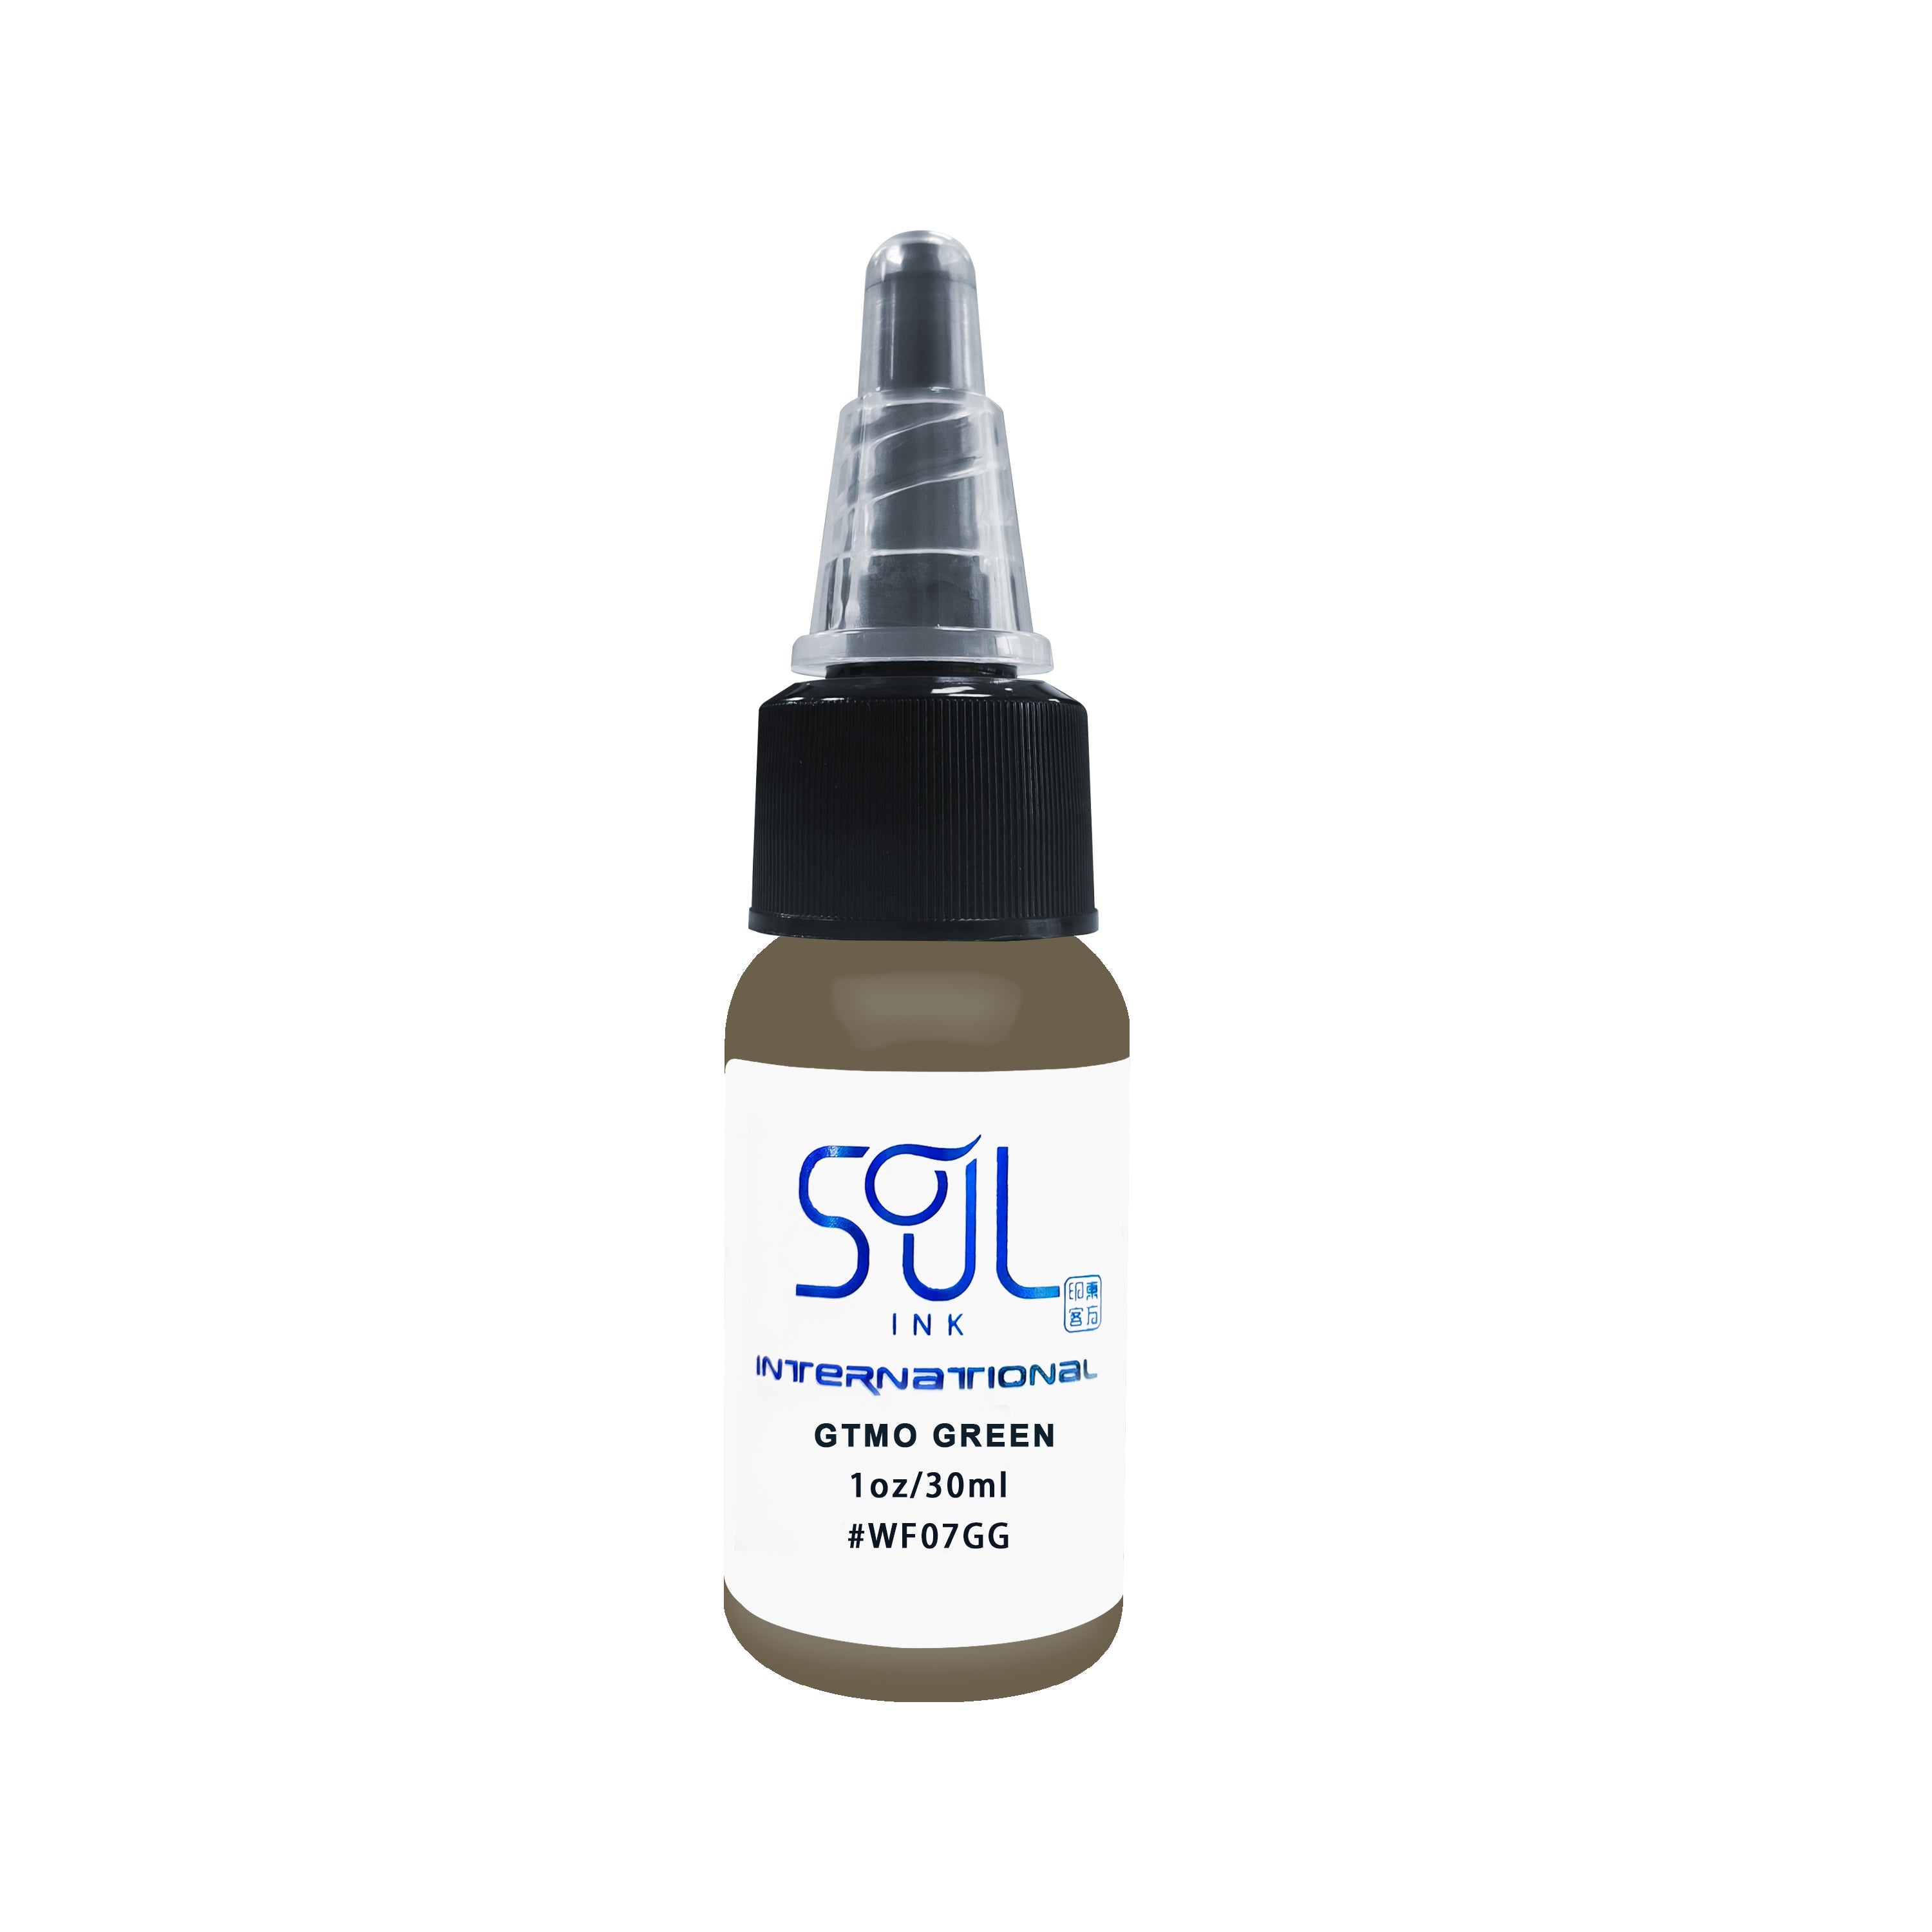 Photograph of a bottle of 'Soul Ink' brand GTMO green ink. The label prominently displays the brand name 'Soul Ink' in stylish blue typography against a white background. The GTMO green 30 ml bottle with a white label featuring the brands name 'Soul Ink'.